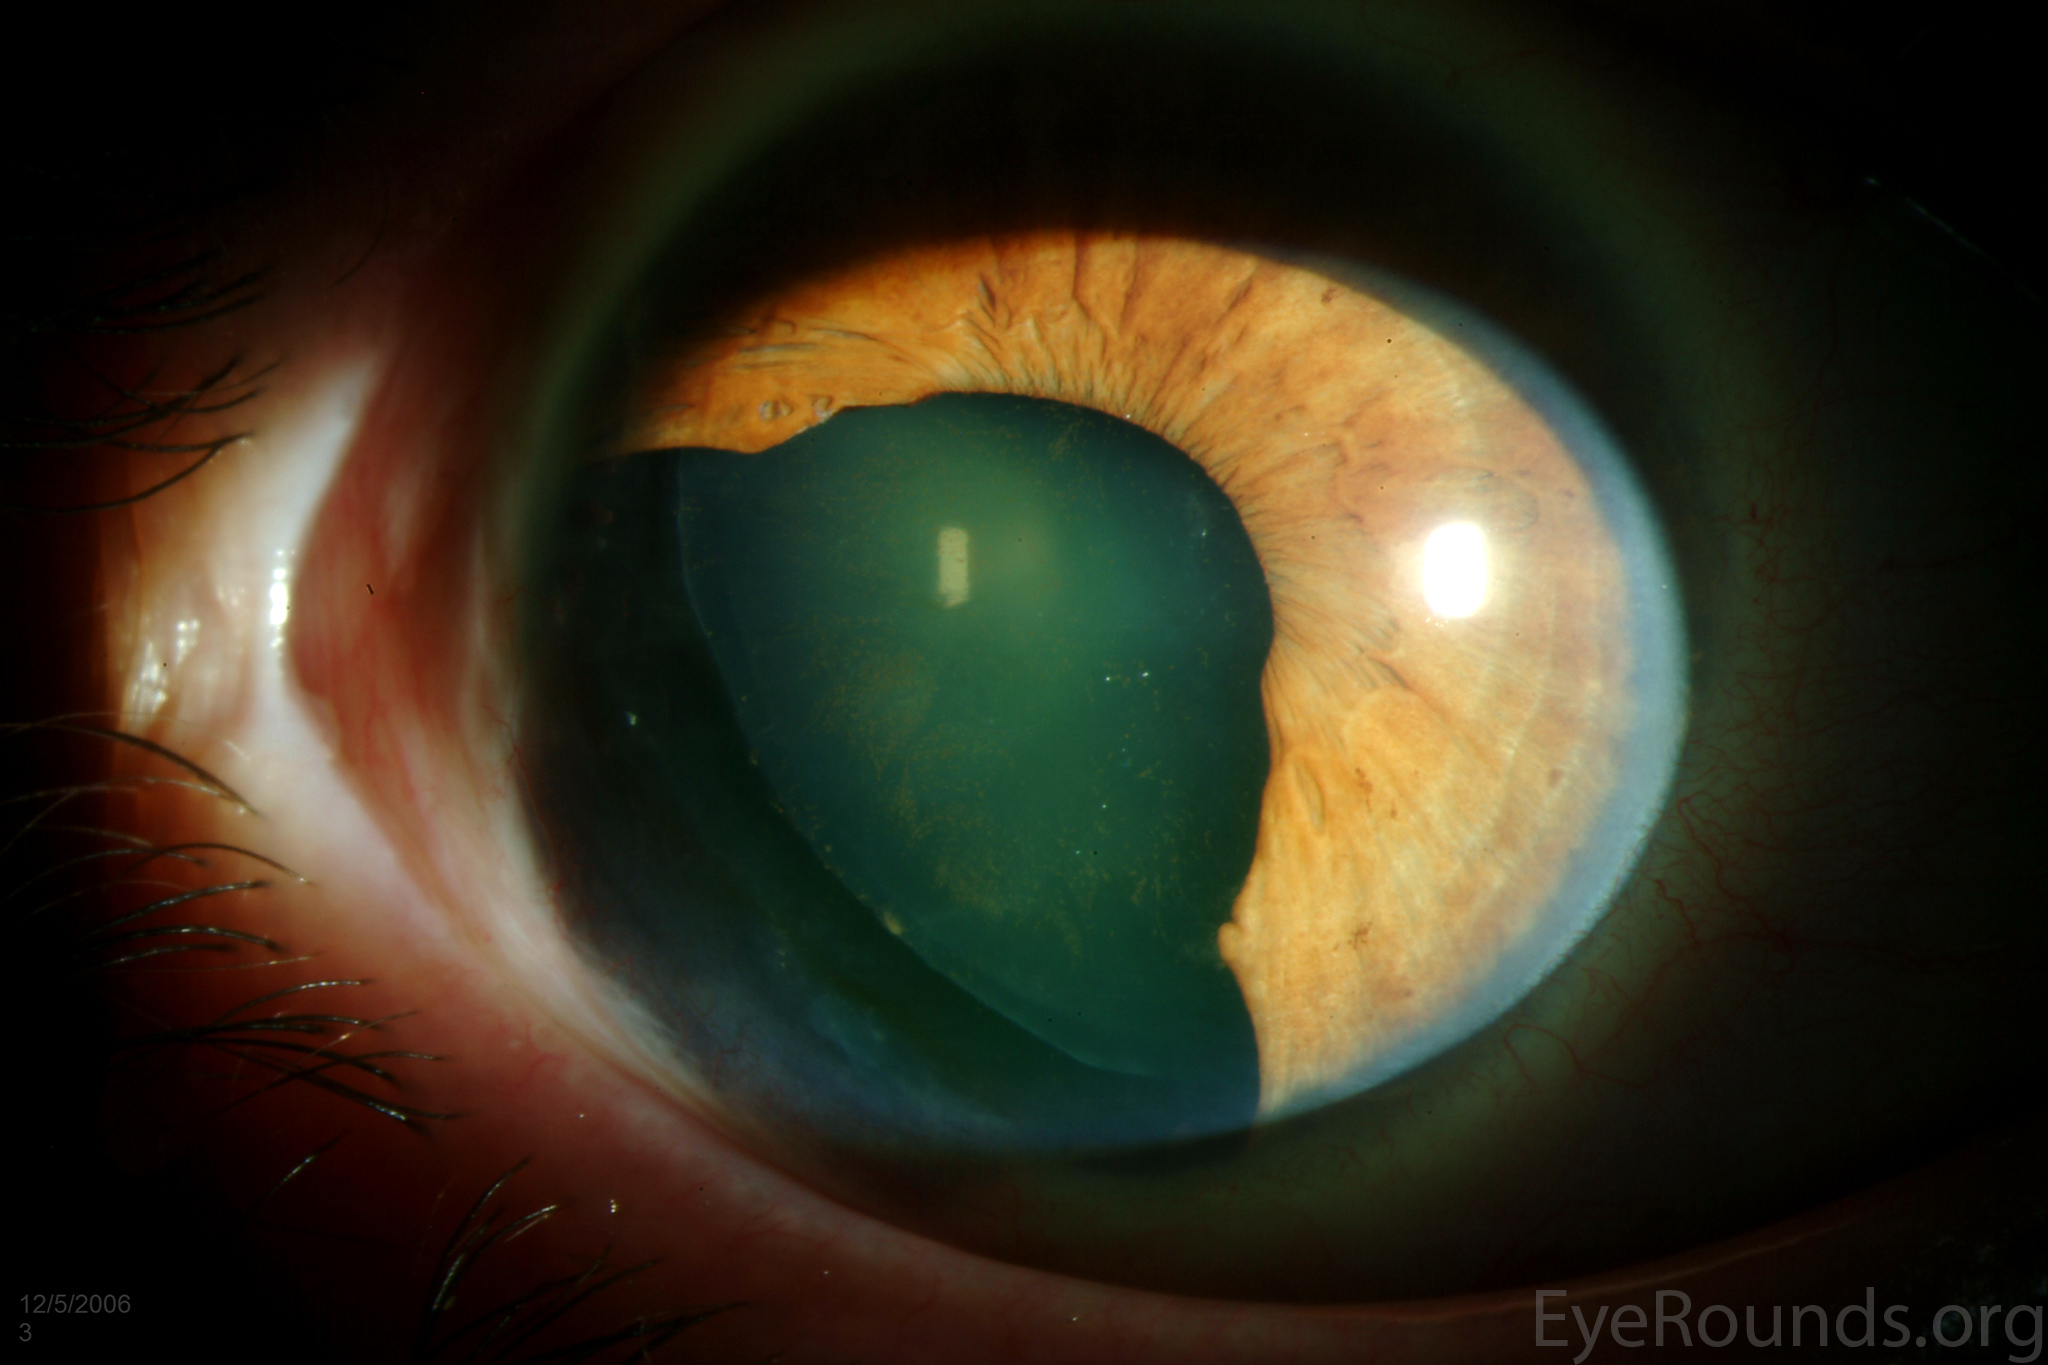 large iris defect after resection of an iris melanoma pre-op